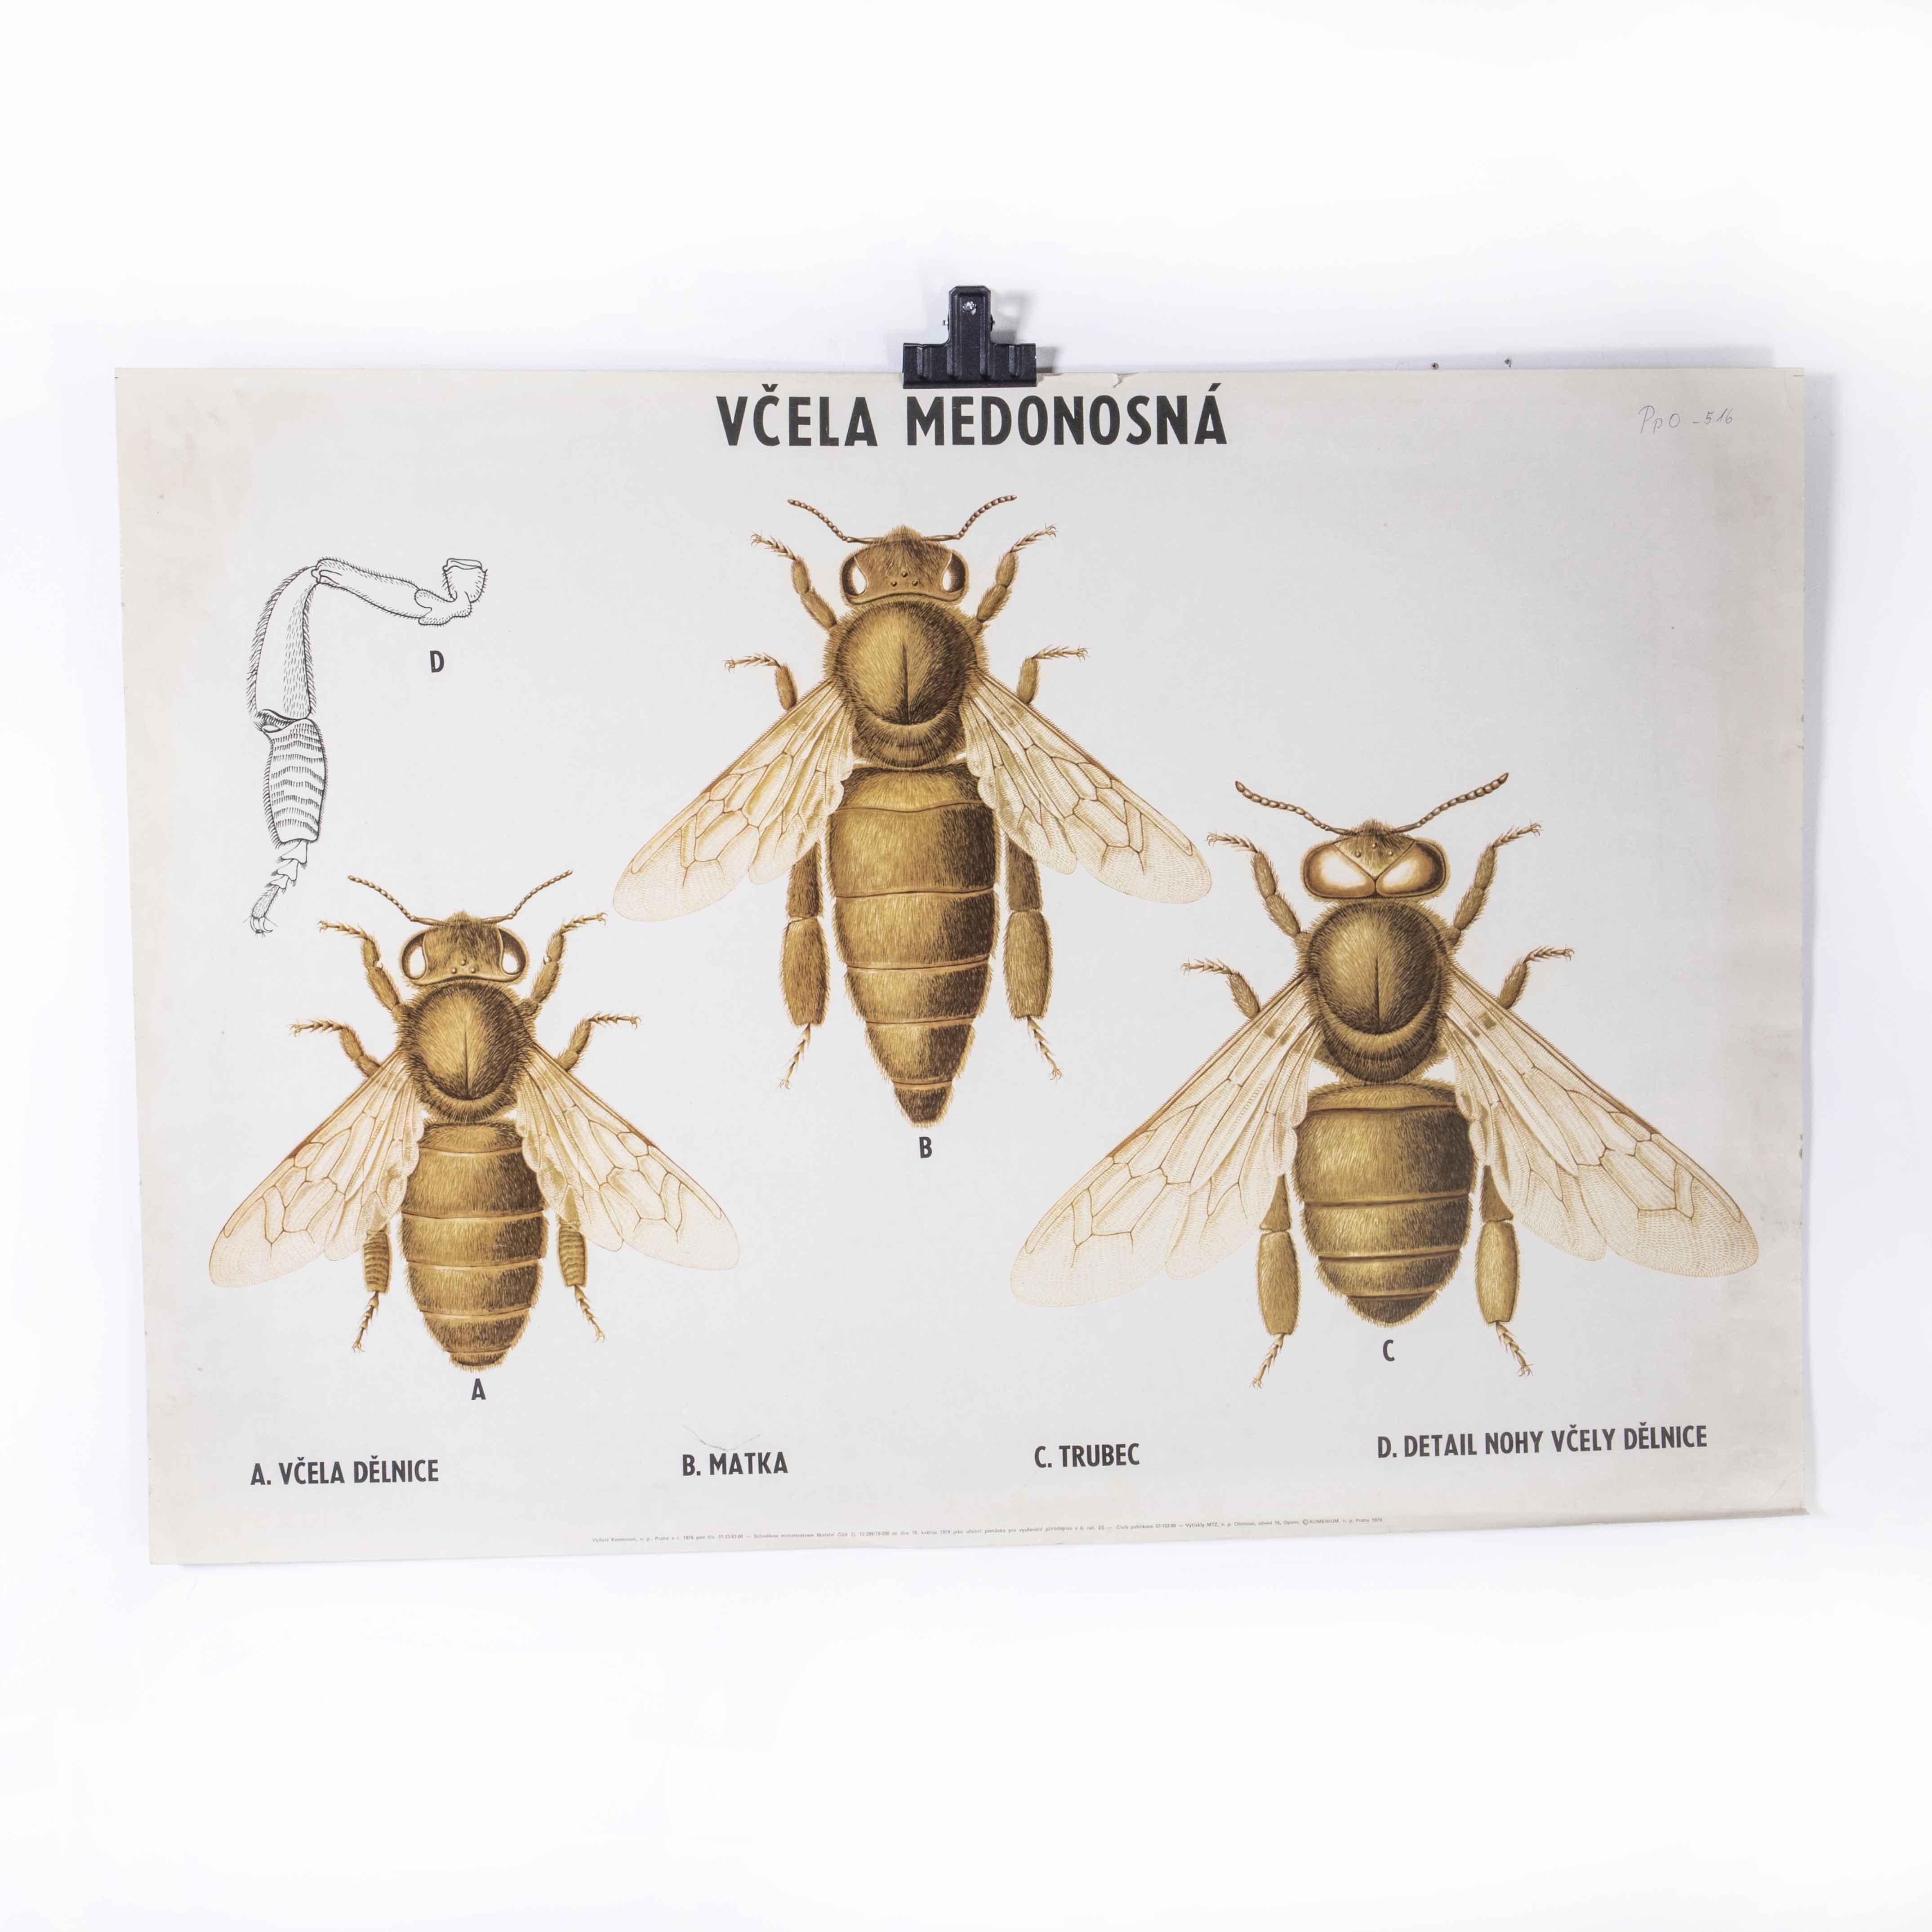 1970's Three Bees Educational Poster
1970's Three Bees Educational Poster. 20th century Czechoslovakian educational chart. A rare and vintage wall chart from the Czech Republic illustrating a bee. This heavyweight paper poster is in excellent